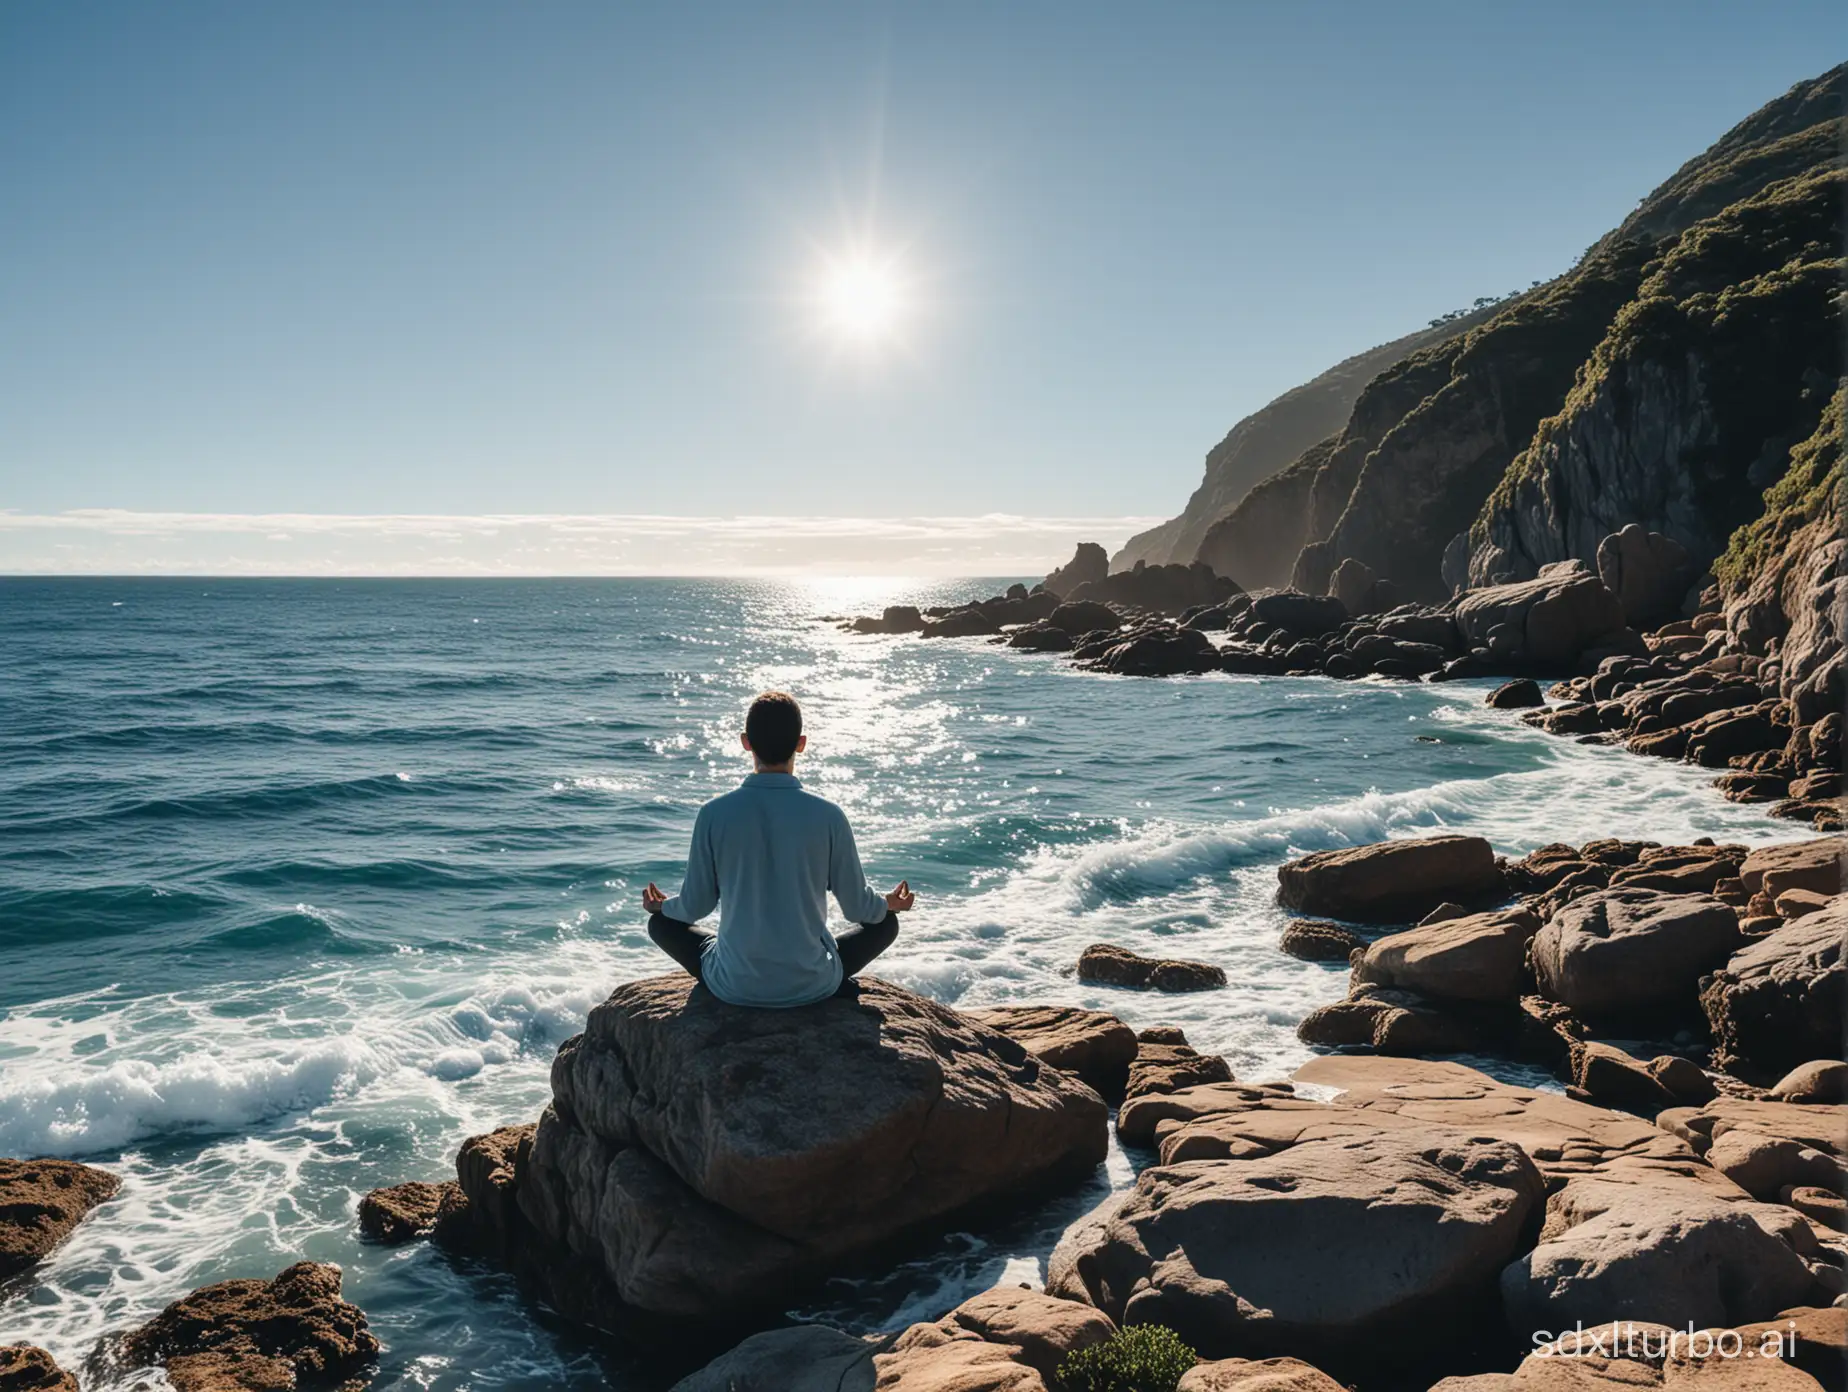 A person sits on a rock by the sea, meditating, under a clear sky, with blue ocean and sky.